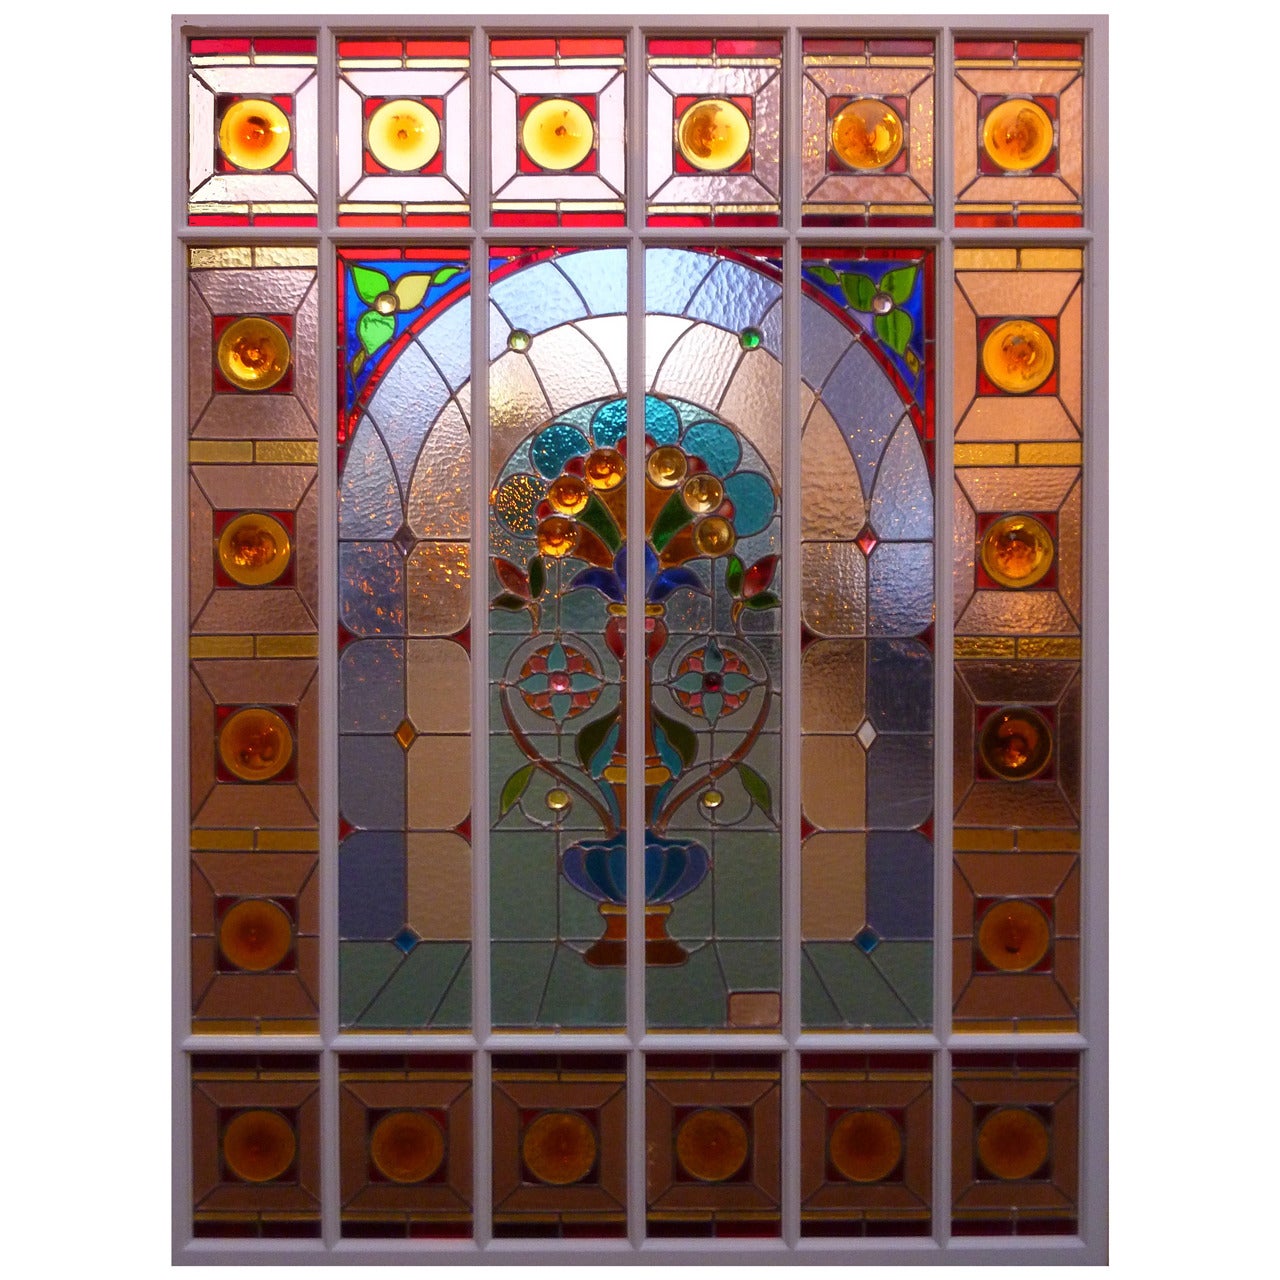 Stained glass panel by Carlo Pizzagalli, circa 1900